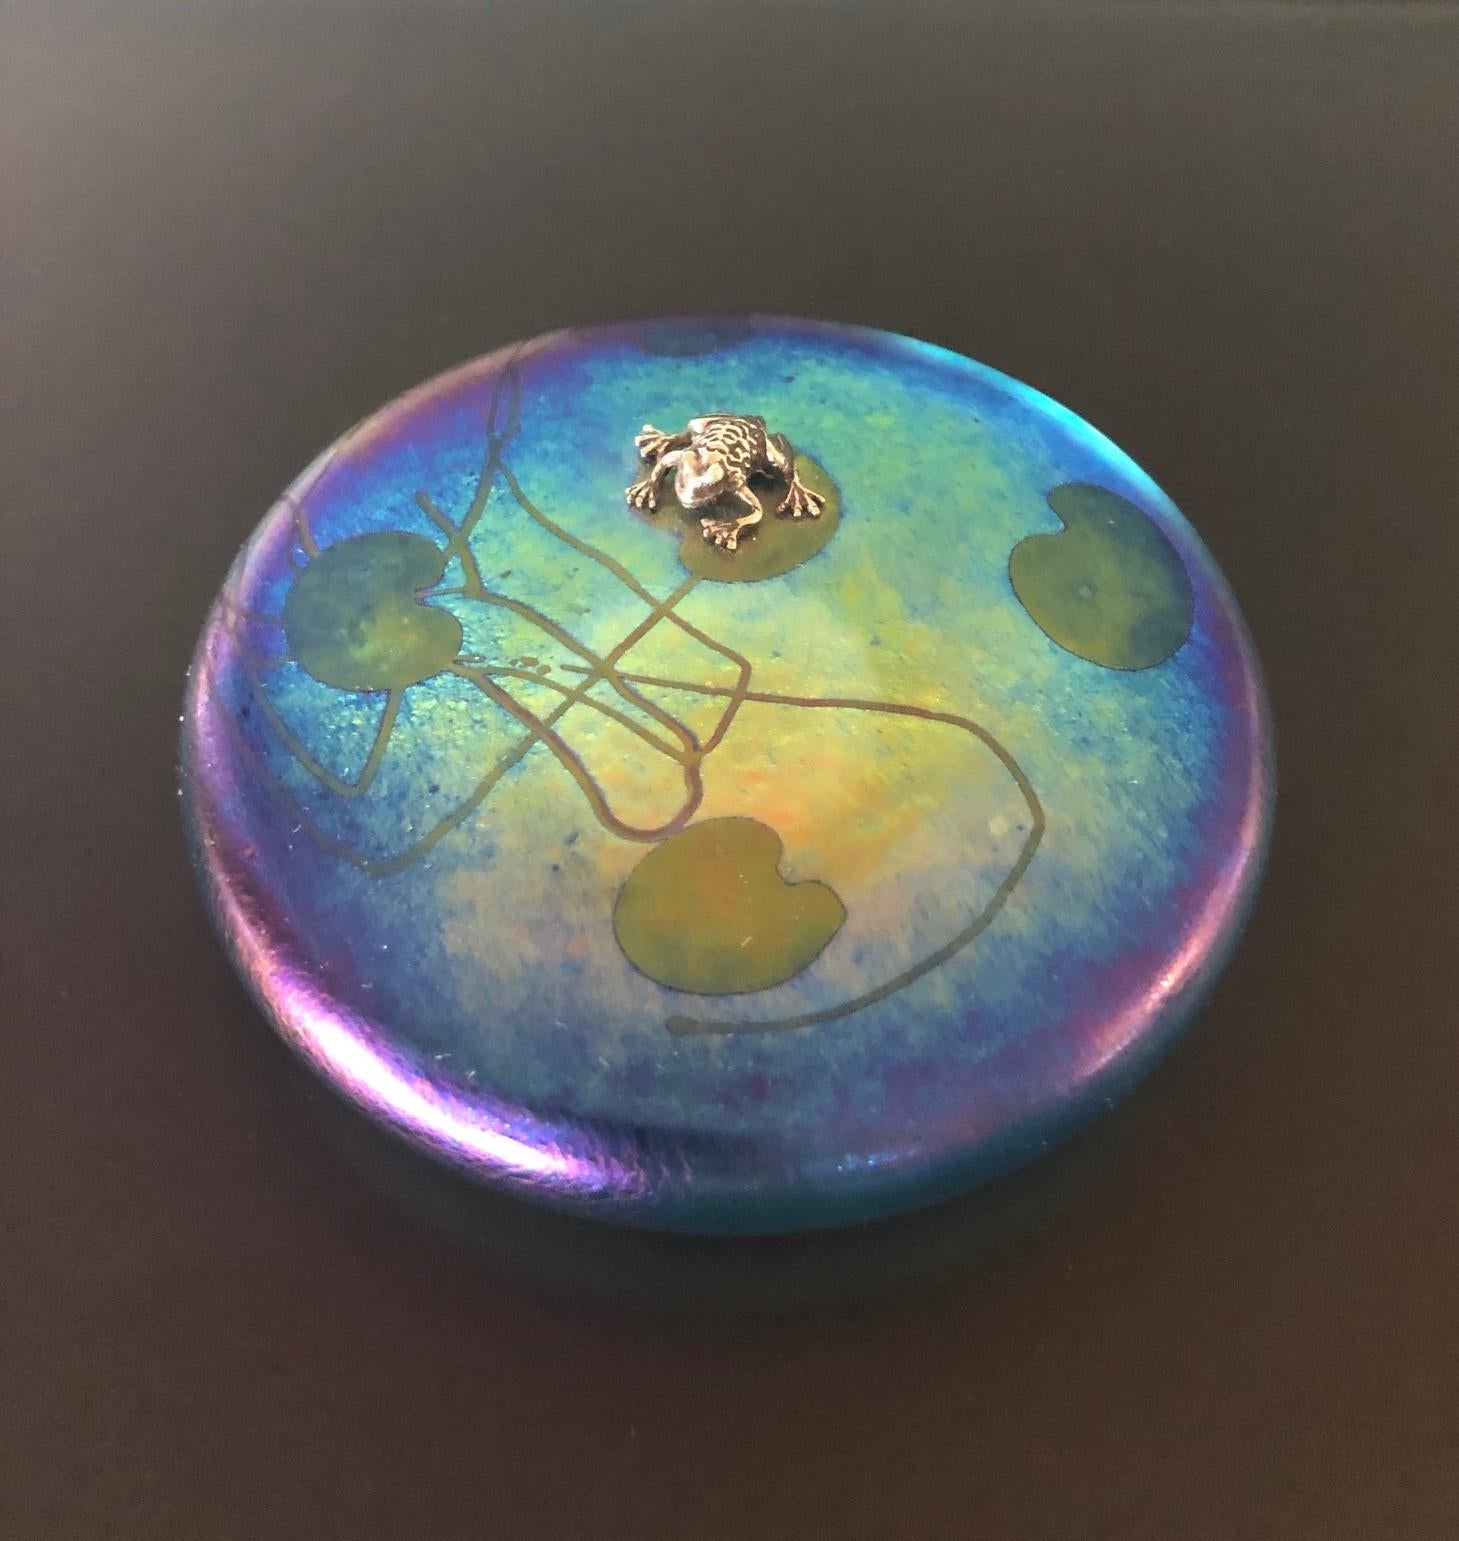 Gorgeous iridescent art glass paperweight by John Ditchfield / Glasform, circa 2000s. The paperweight of compressed circular form decorated with an applied silver frog over a purple iridescent ground with stylized lily pad leaves and whiplash lines.